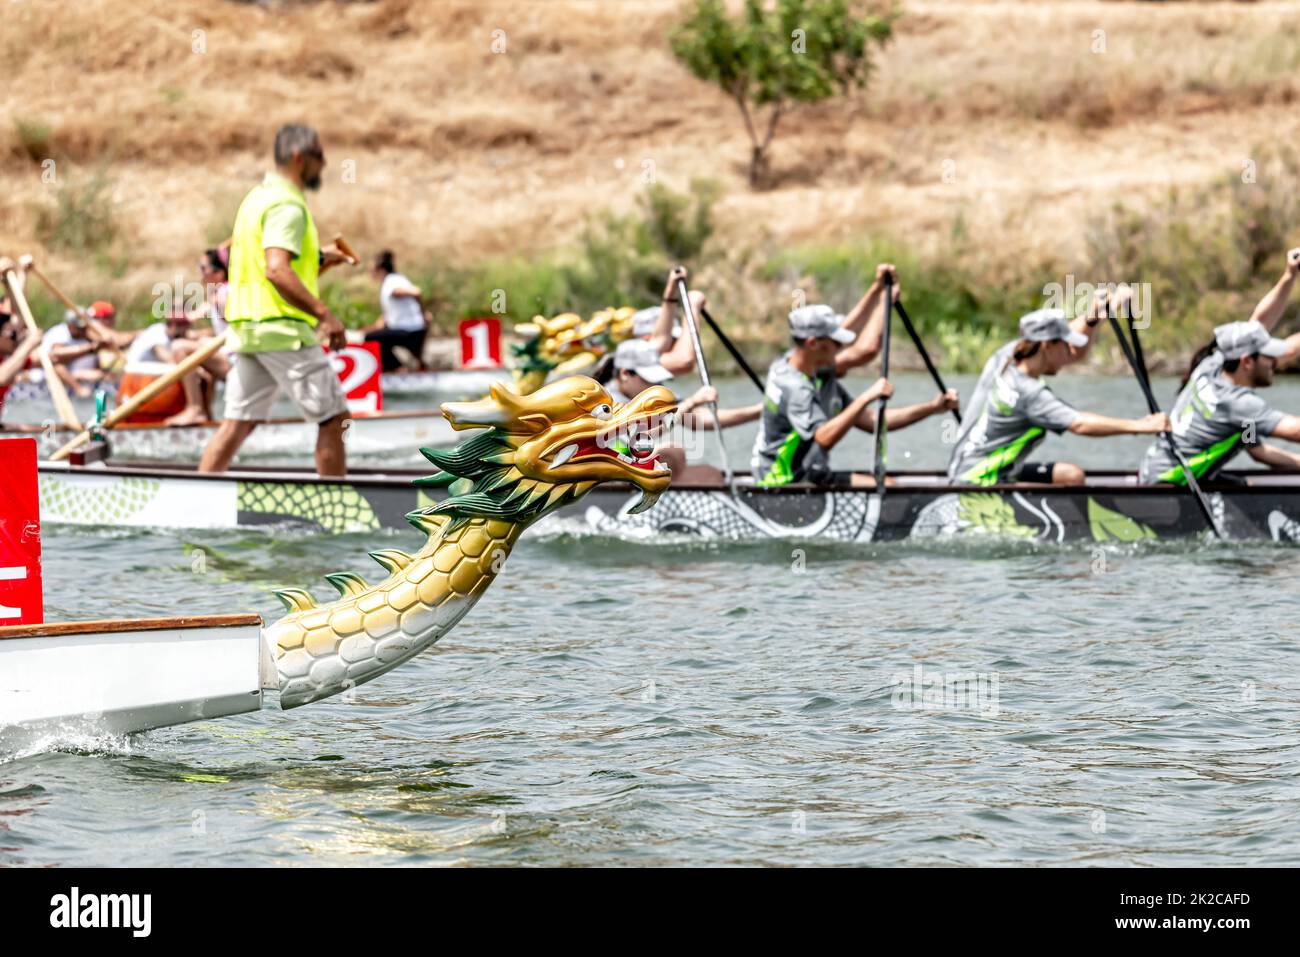 Teams compete in a dragon boat race Stock Photo